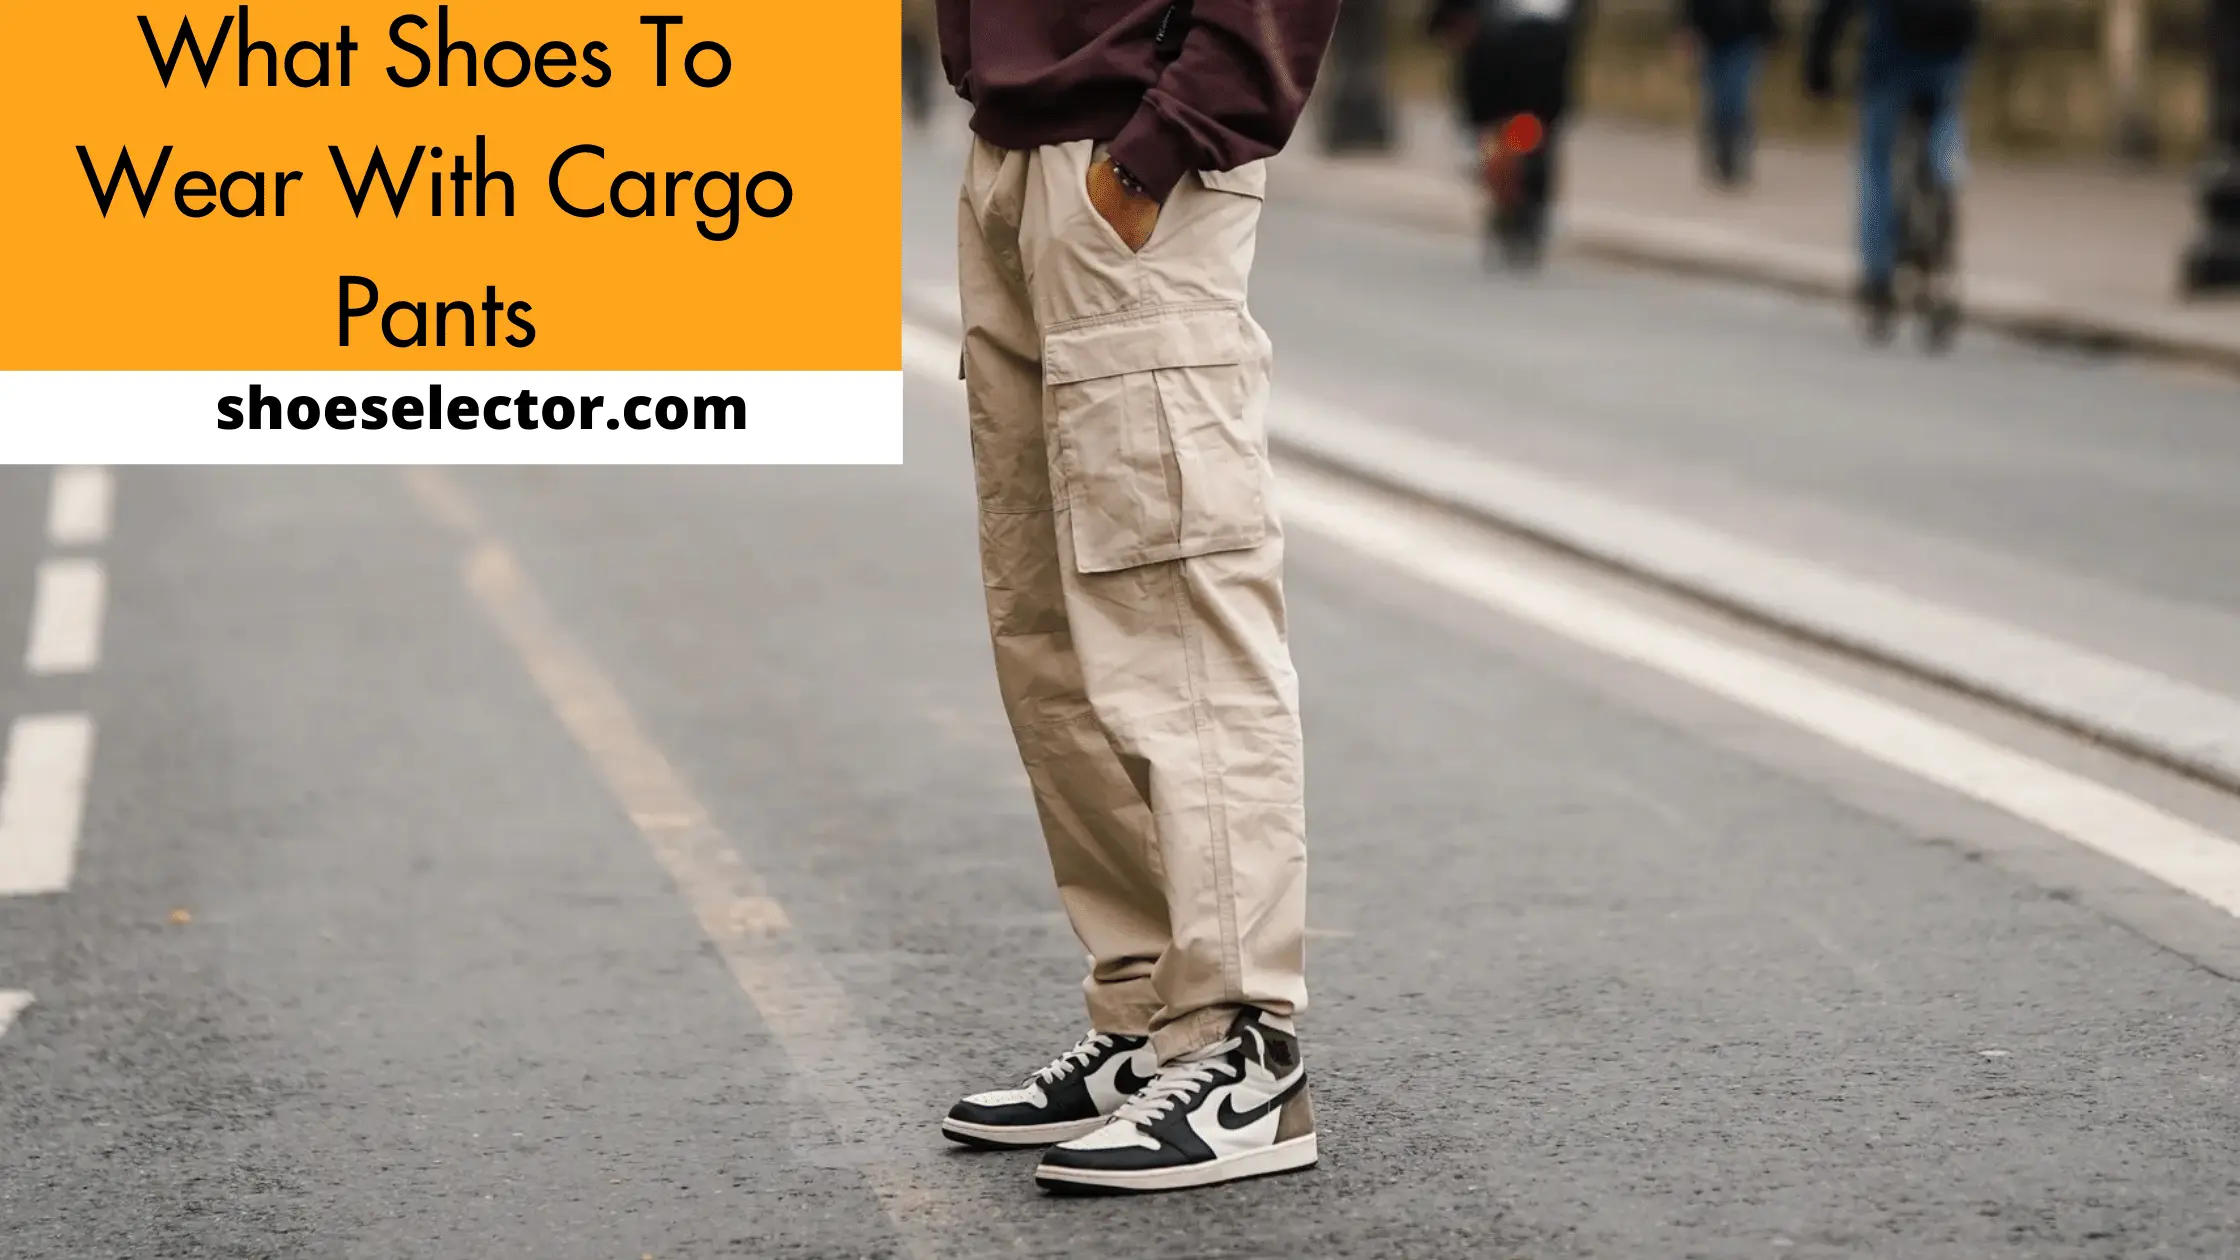 What Shoes To Wear With Cargo Pants? Complete Guide